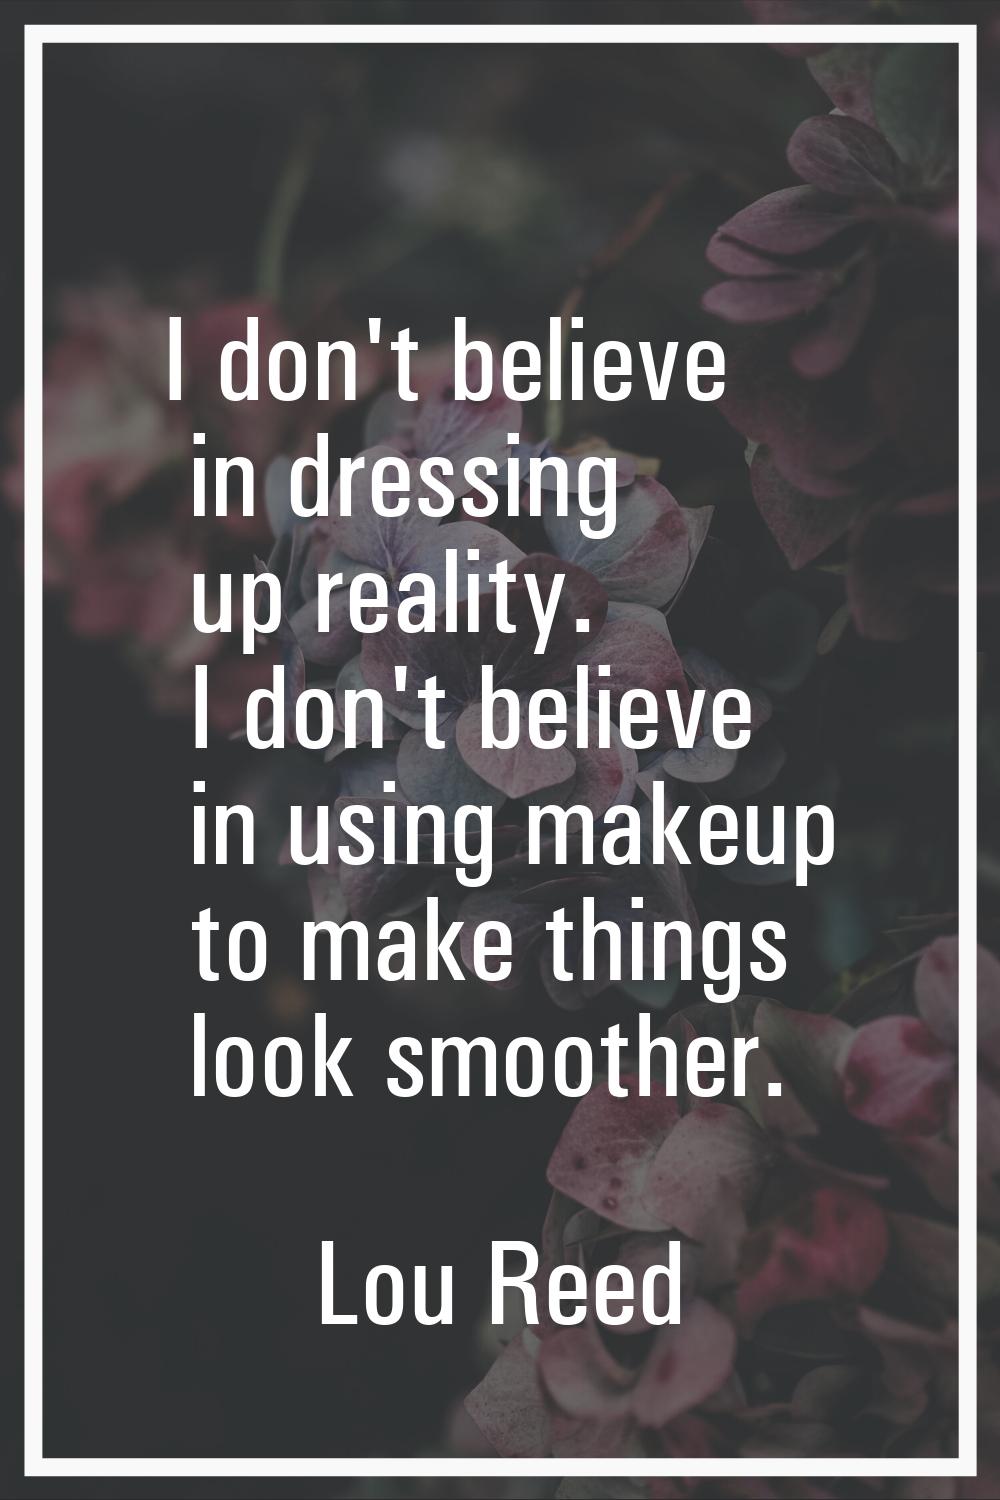 I don't believe in dressing up reality. I don't believe in using makeup to make things look smoothe